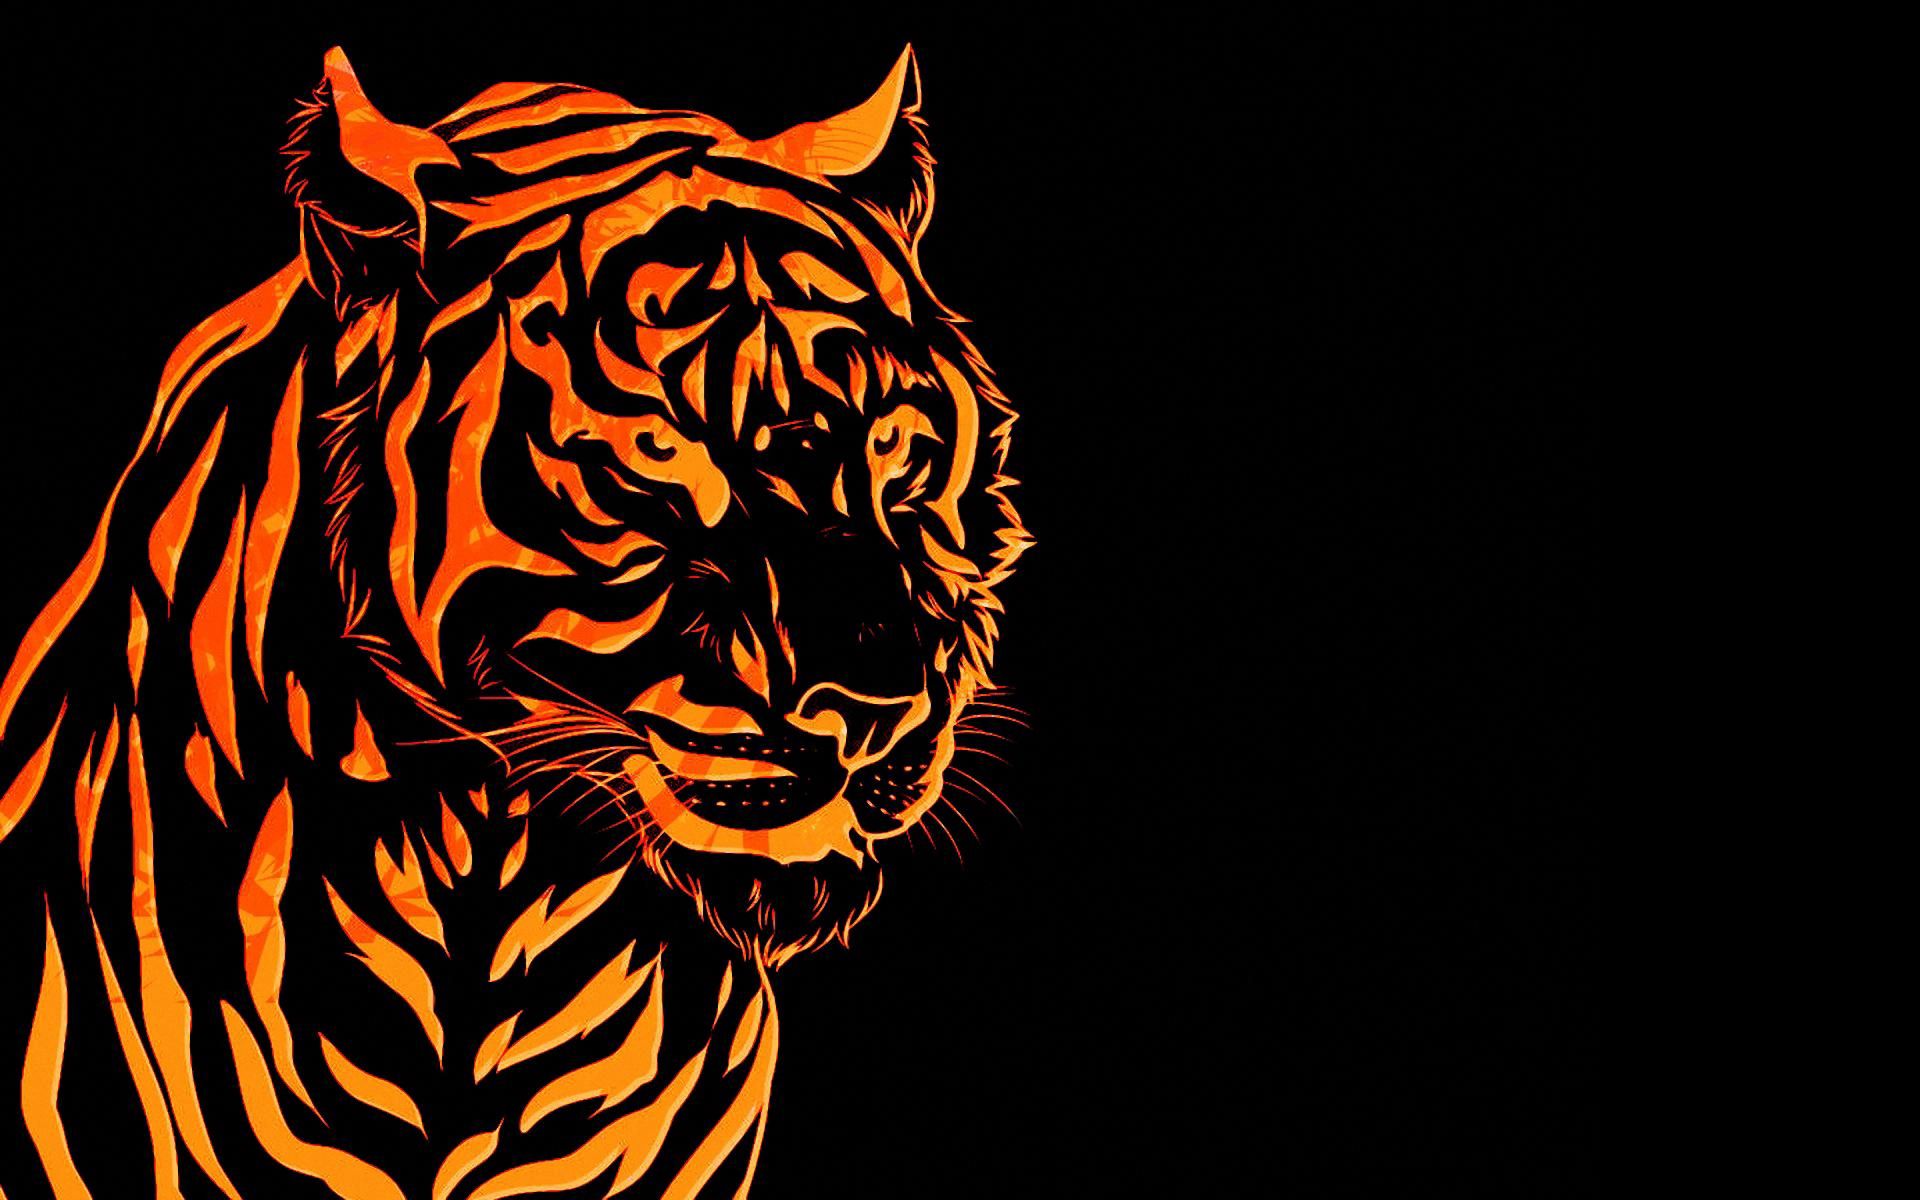 133611 download wallpaper vector, lines, tiger, graphics screensavers and pictures for free